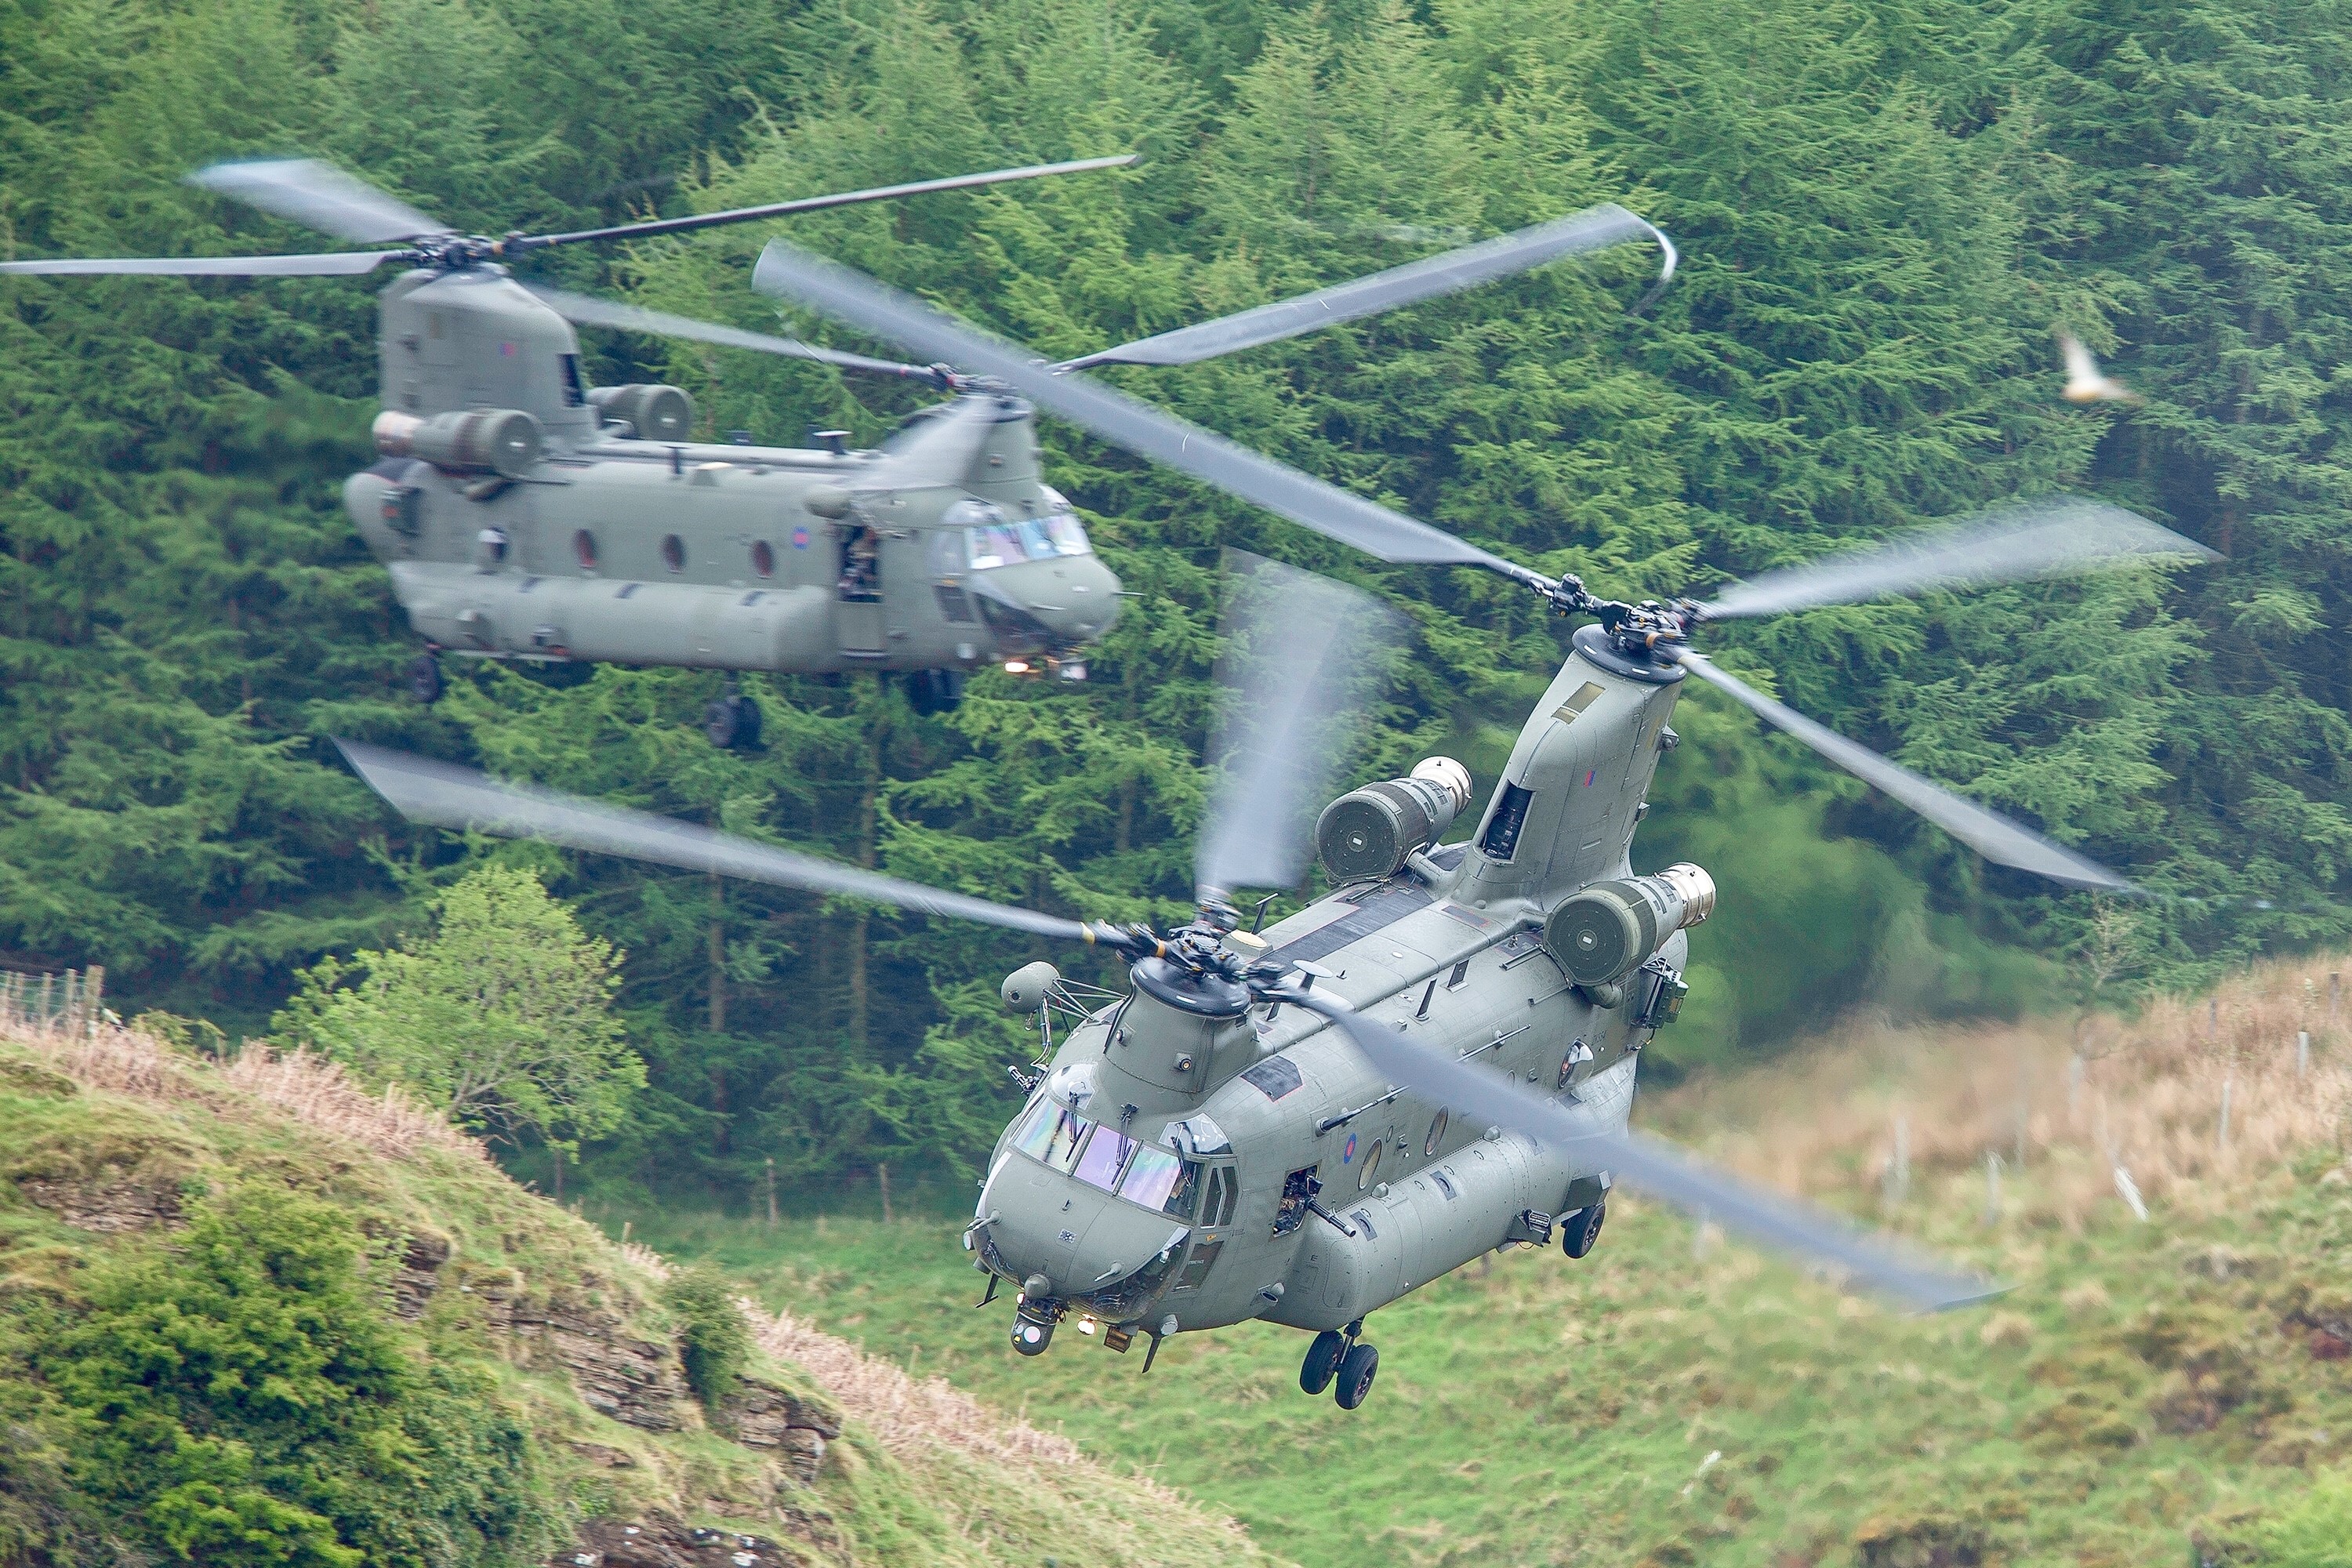 Two Chinook helicopters are flying, there's a forest in the backdrop